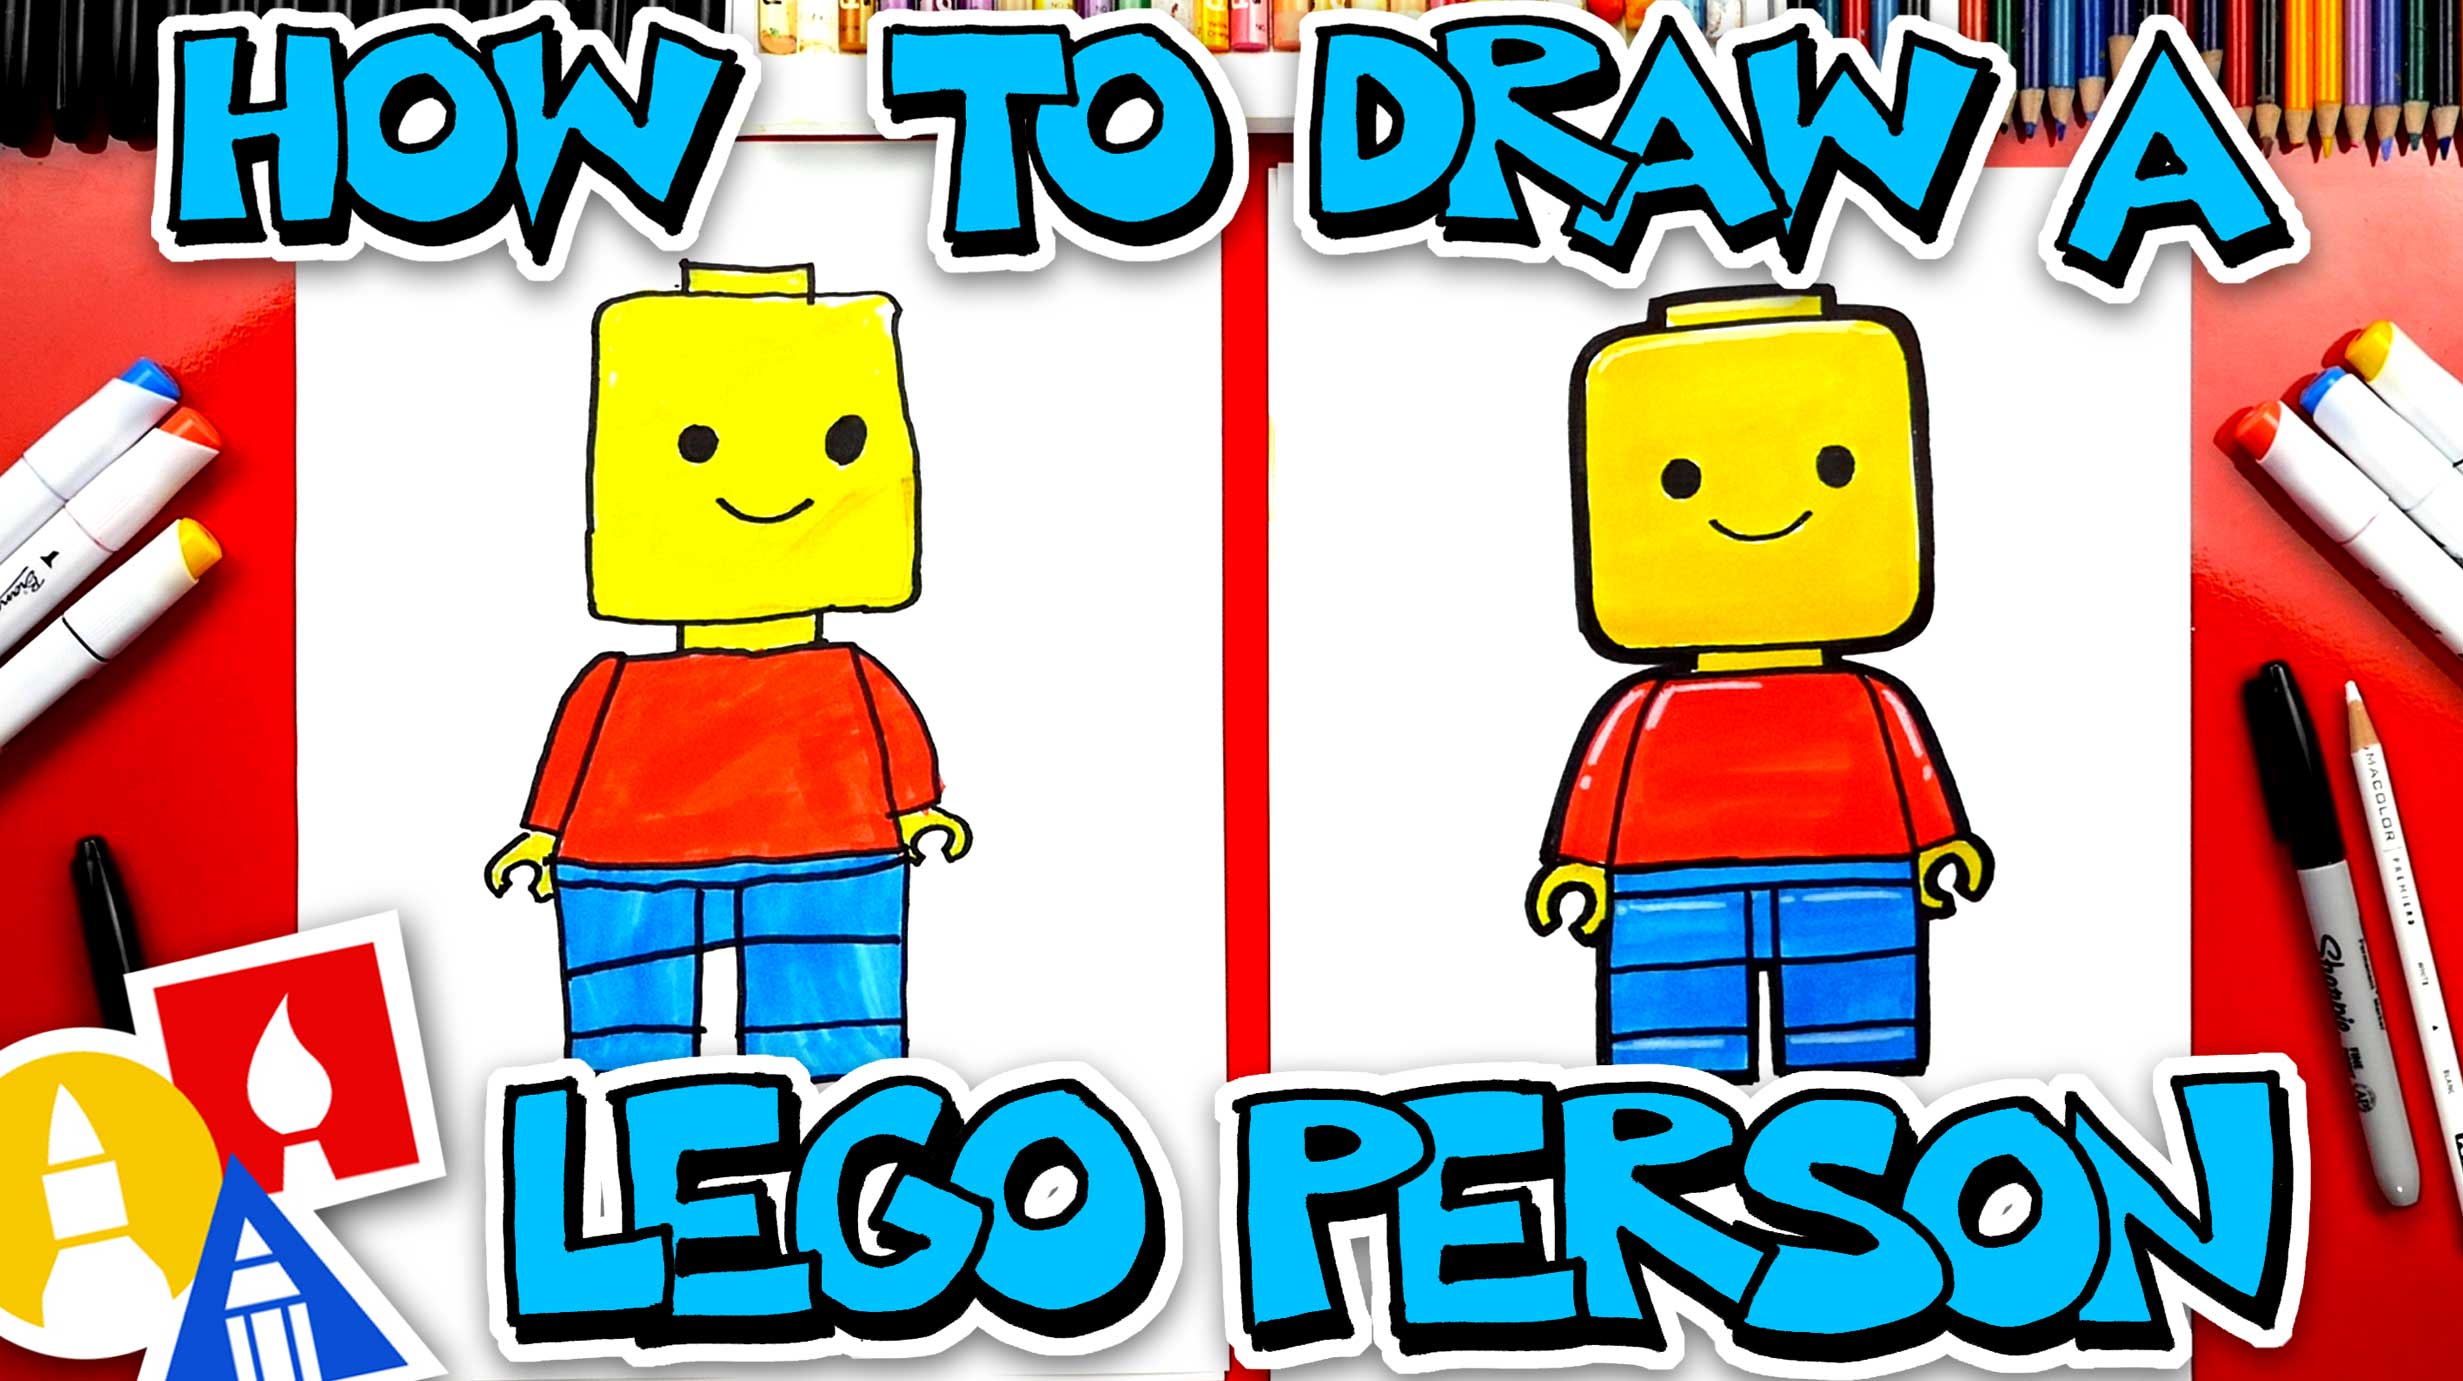 How To Draw A Lego Person - Art For Kids Hub